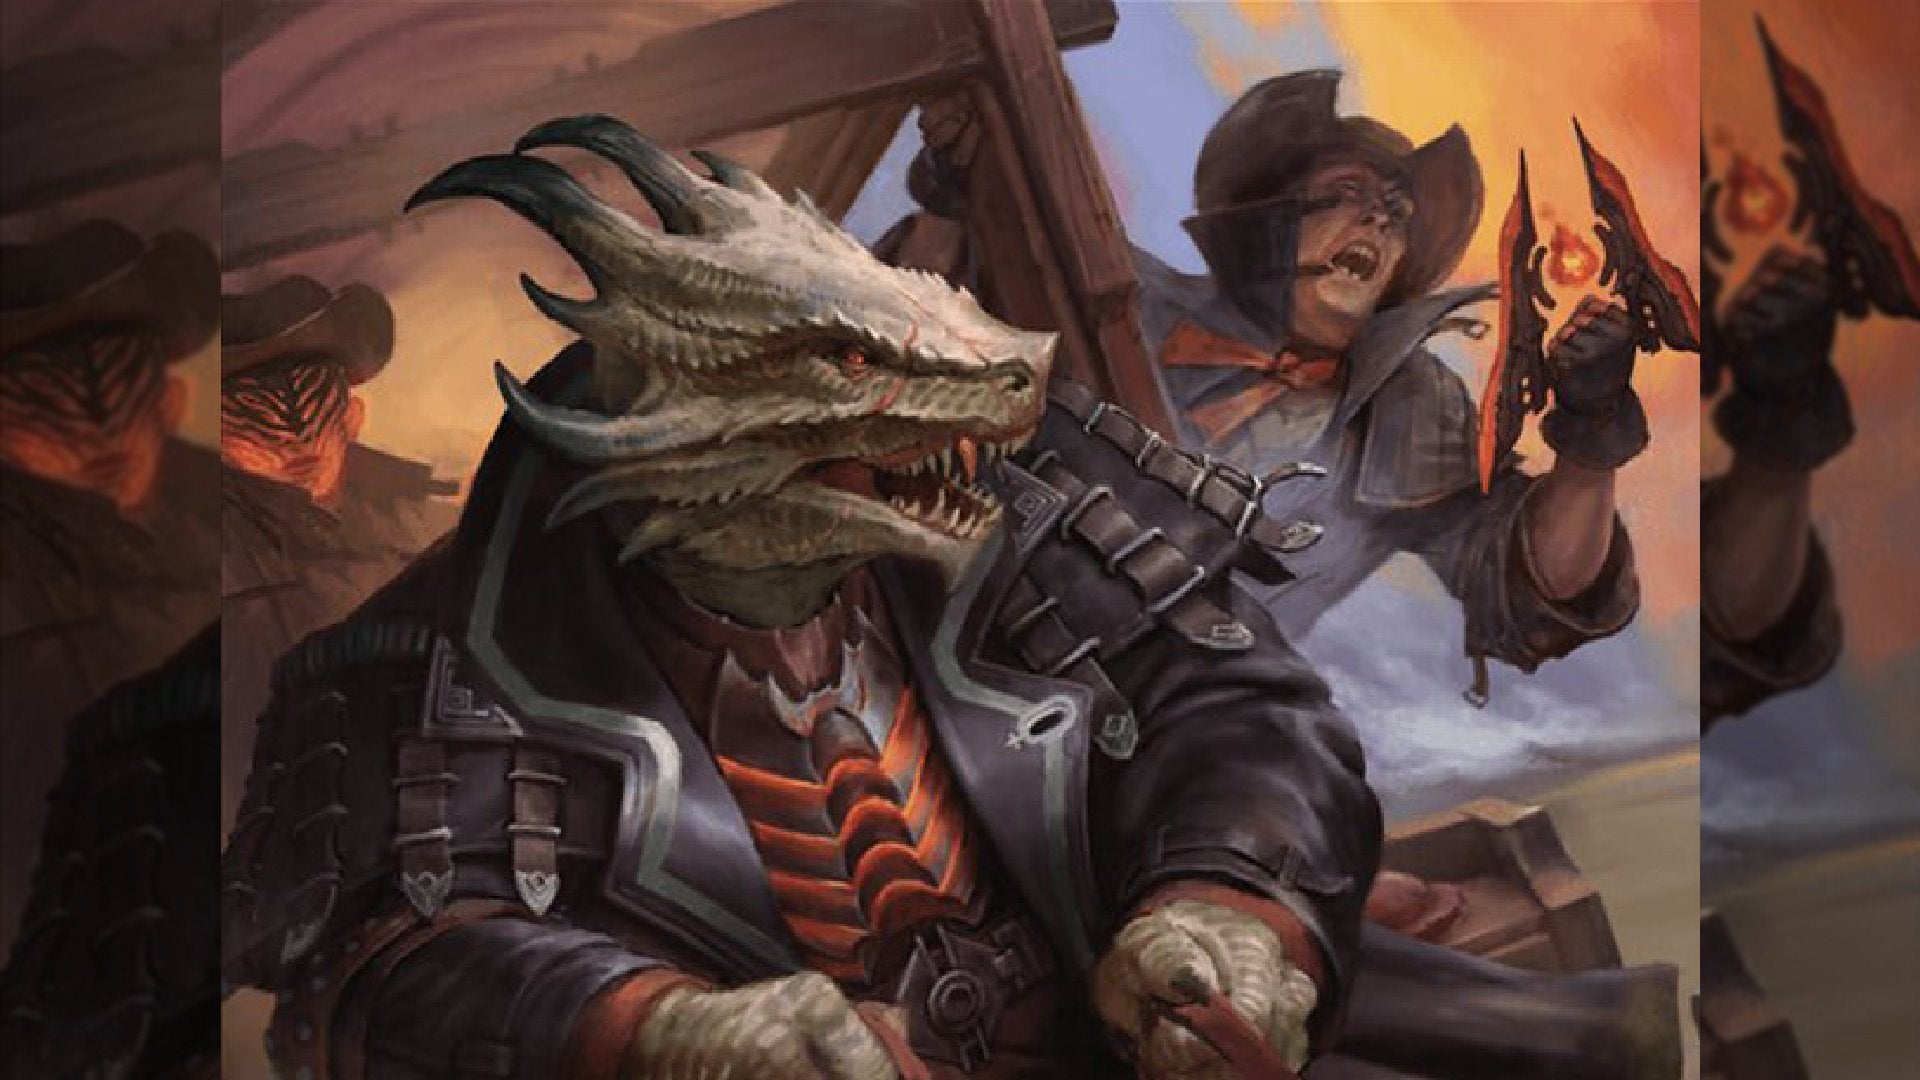 Card art from the Hellspur Posse Boss card in MTG.